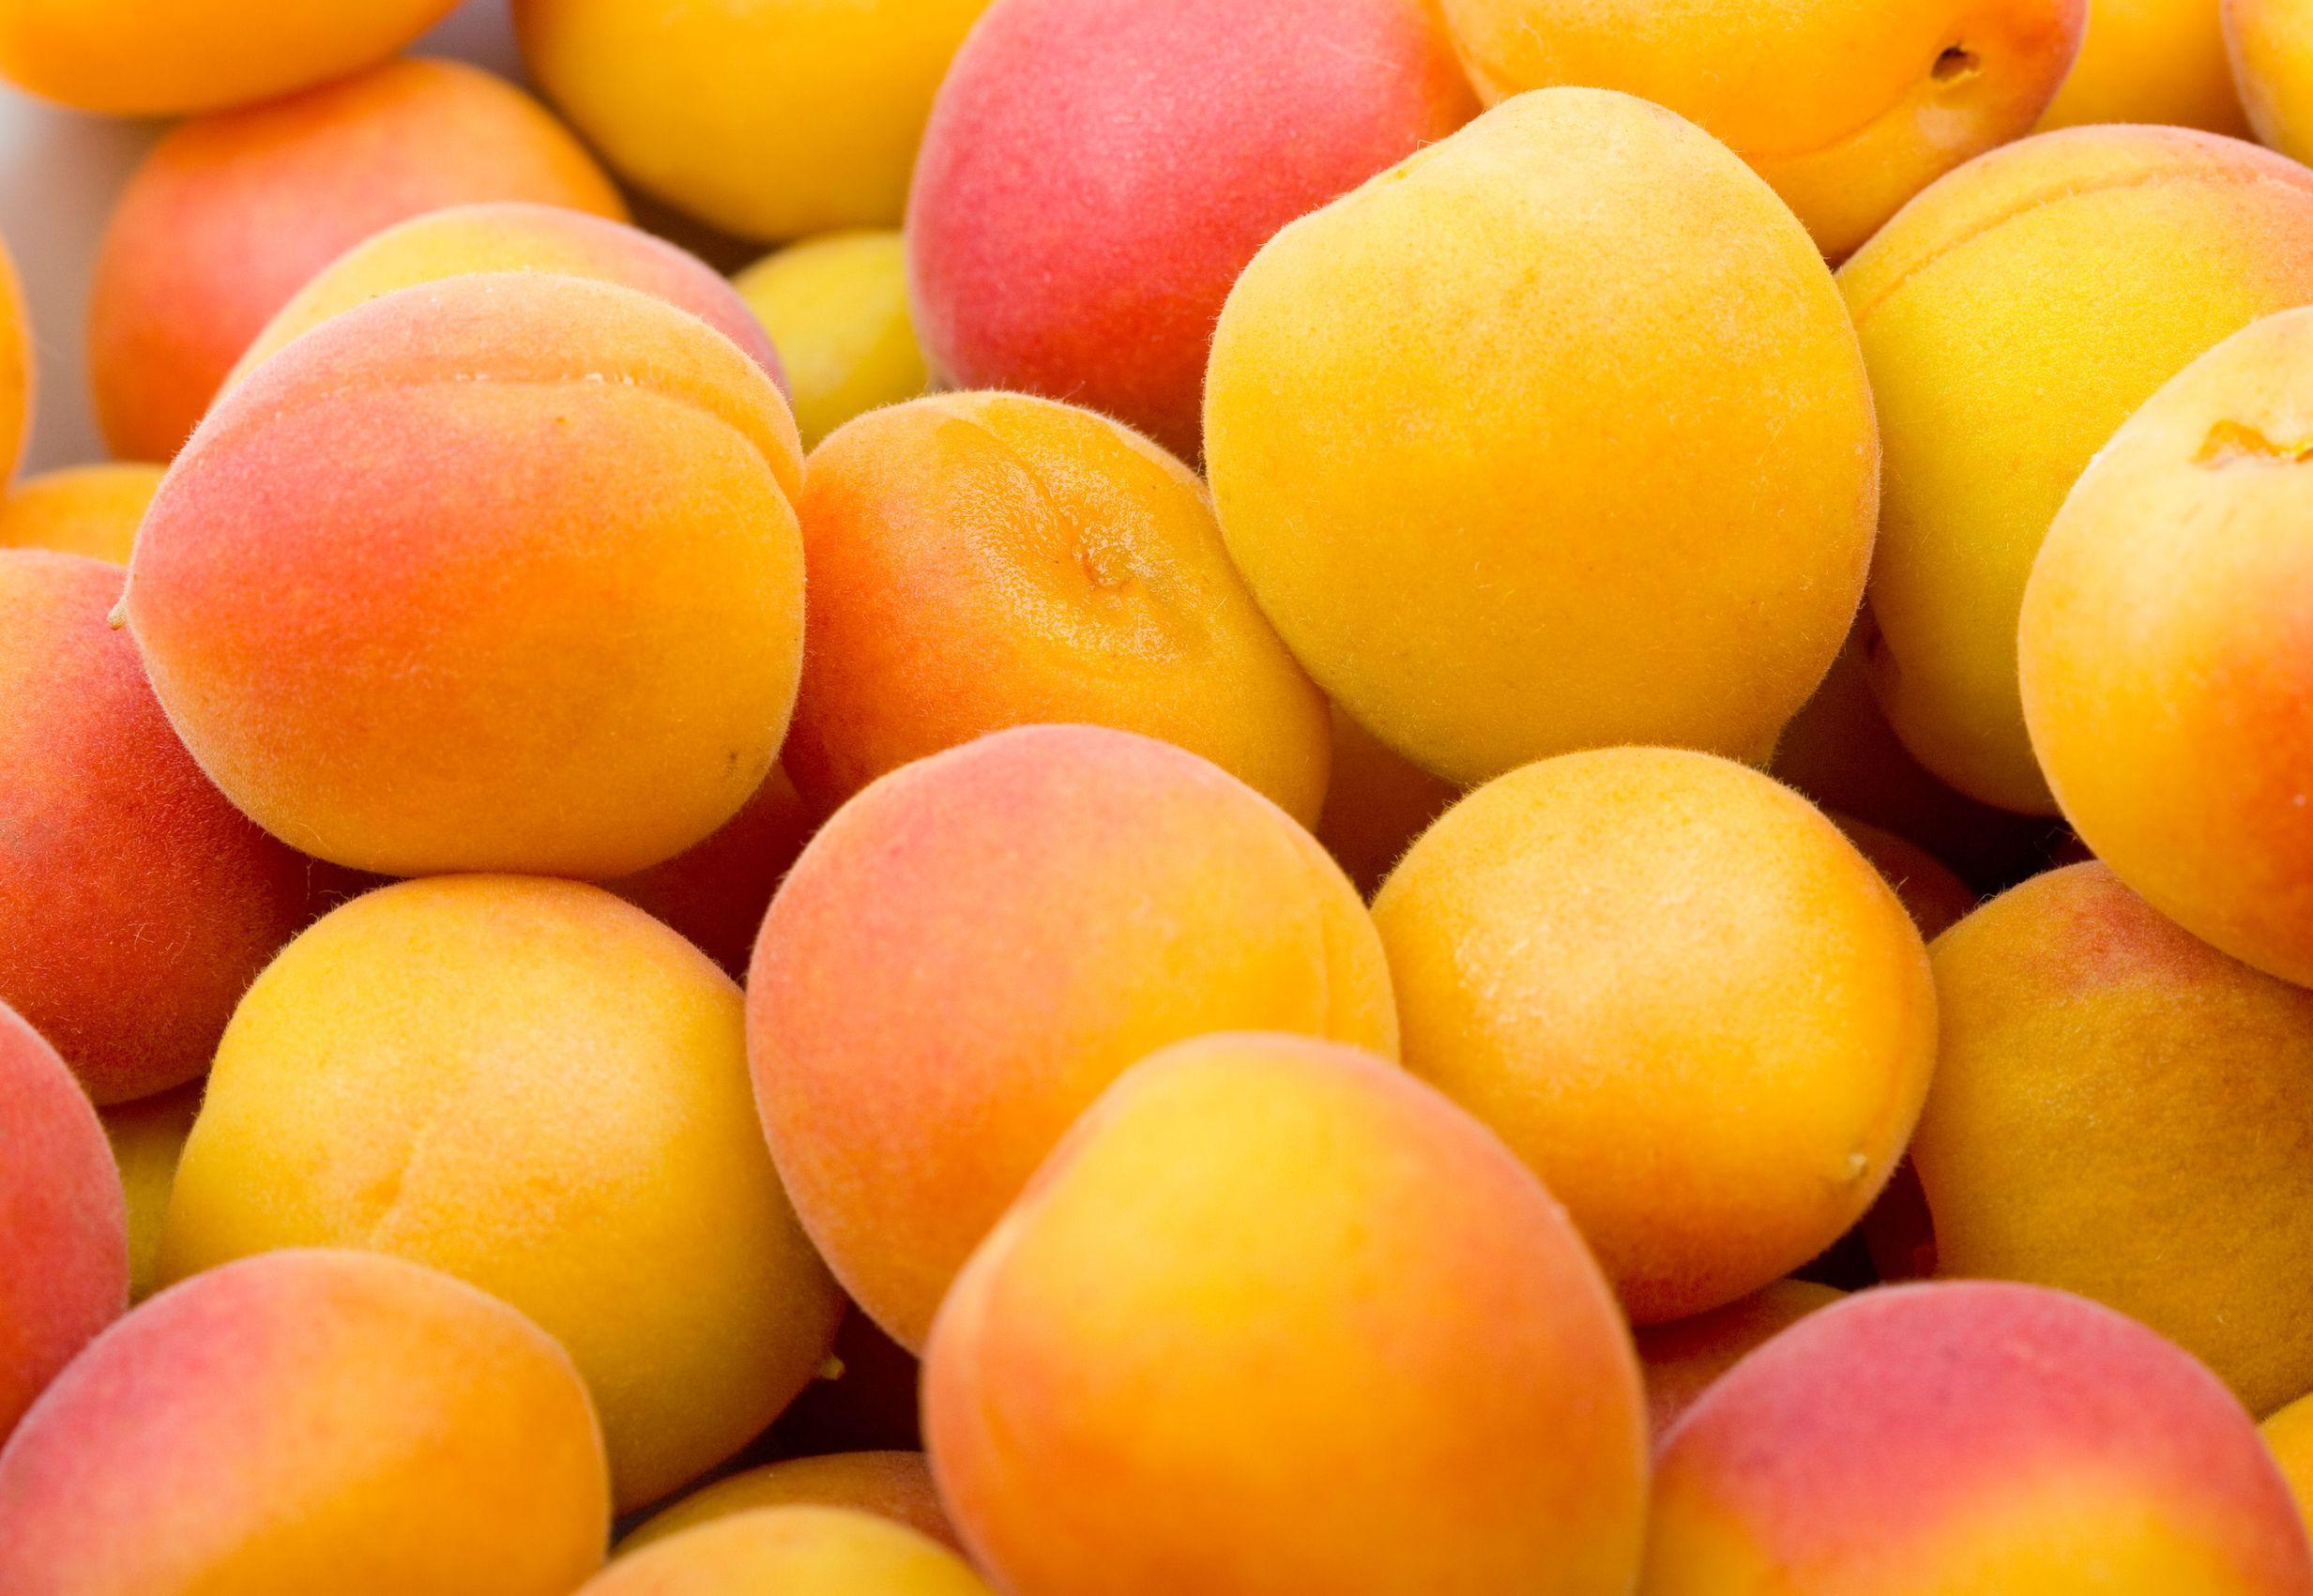 January 9 is National Apricot Day. Foodimentary Food